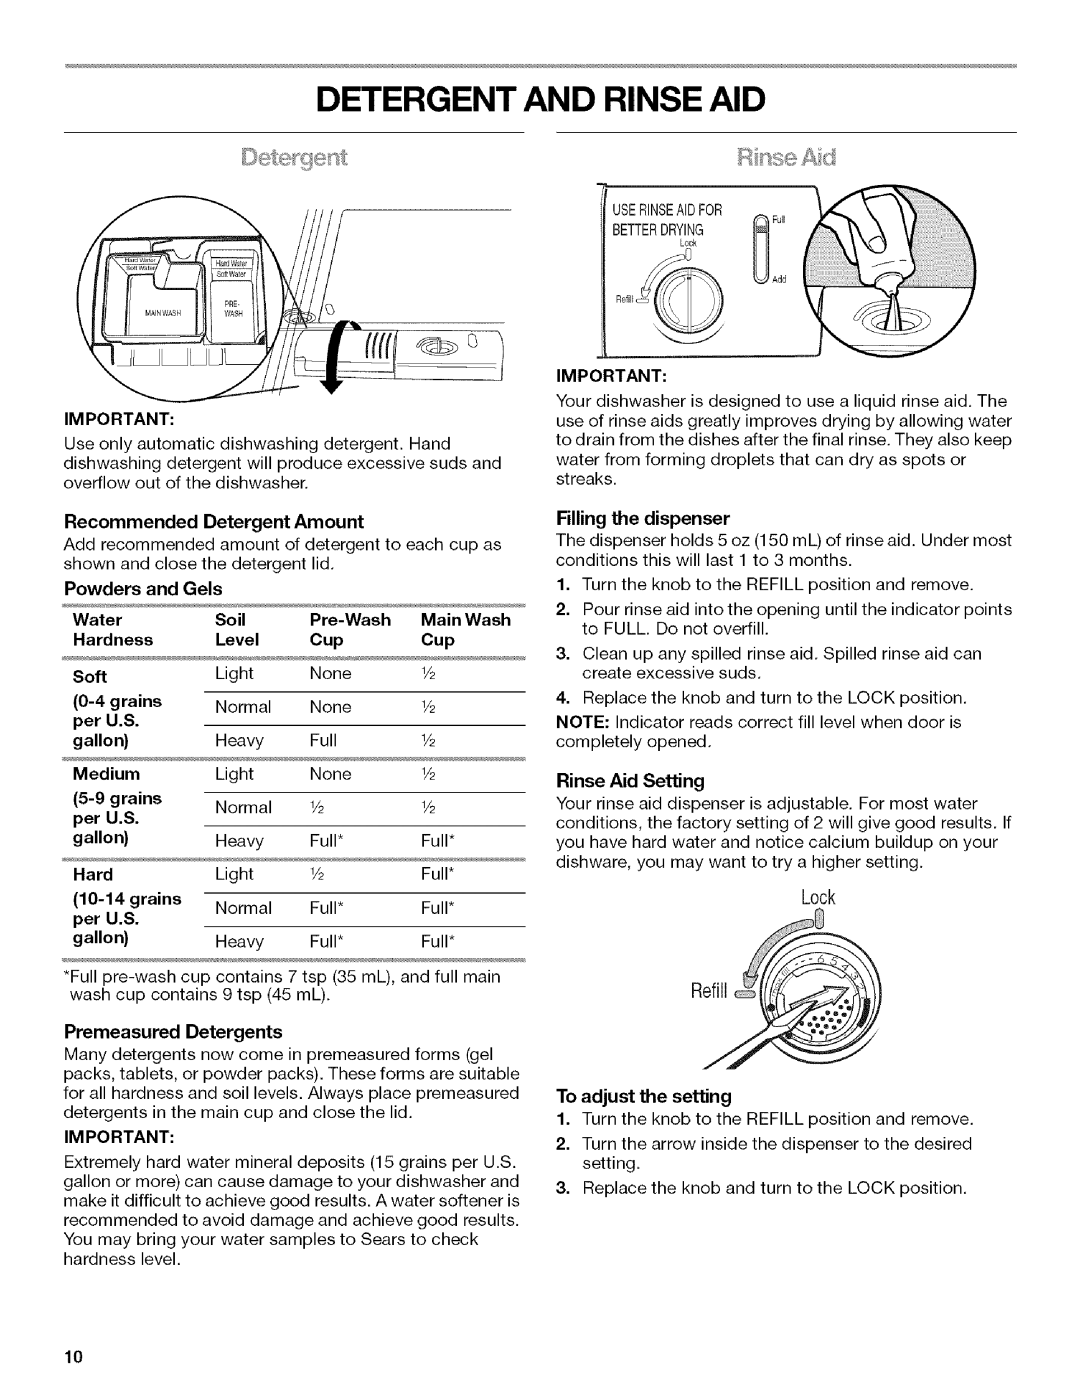 Kenmore 665.1312, 665.1342 manual Detergent And Rinse Aid, RnseAd, Lock Refill 